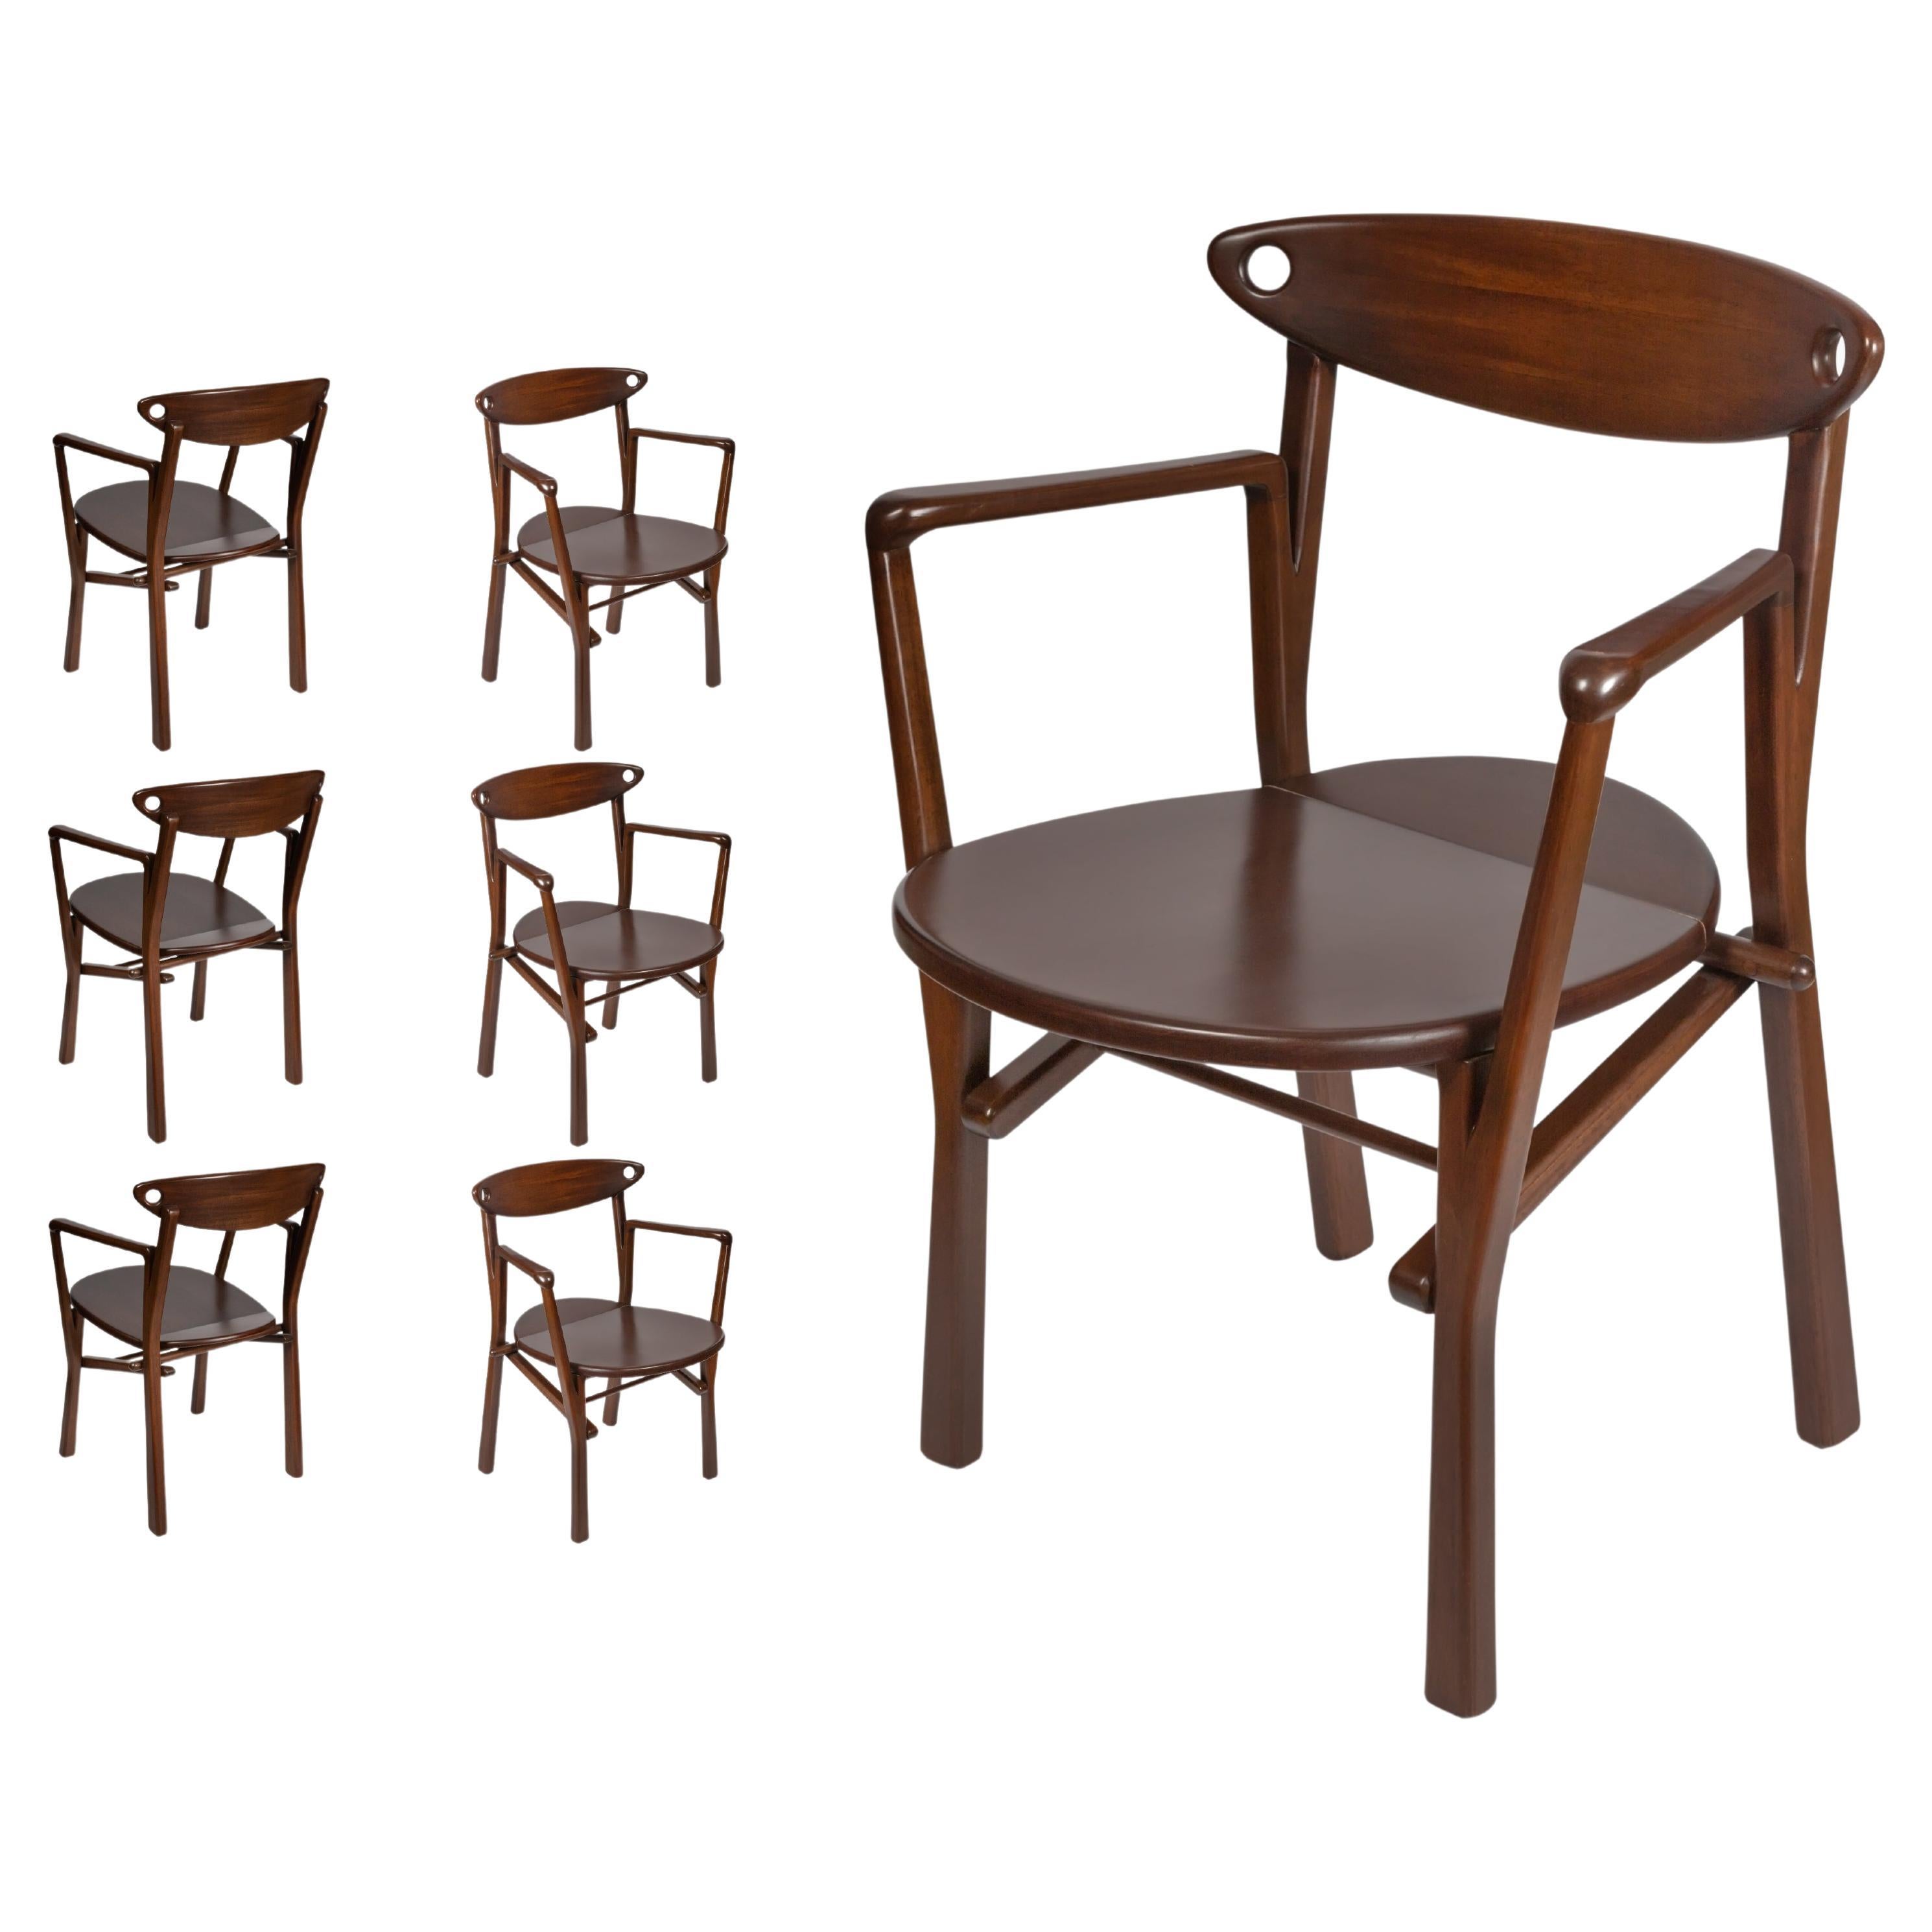 Set of 06 Dinner Chairs Laje in Dark Brown Finish Wood 